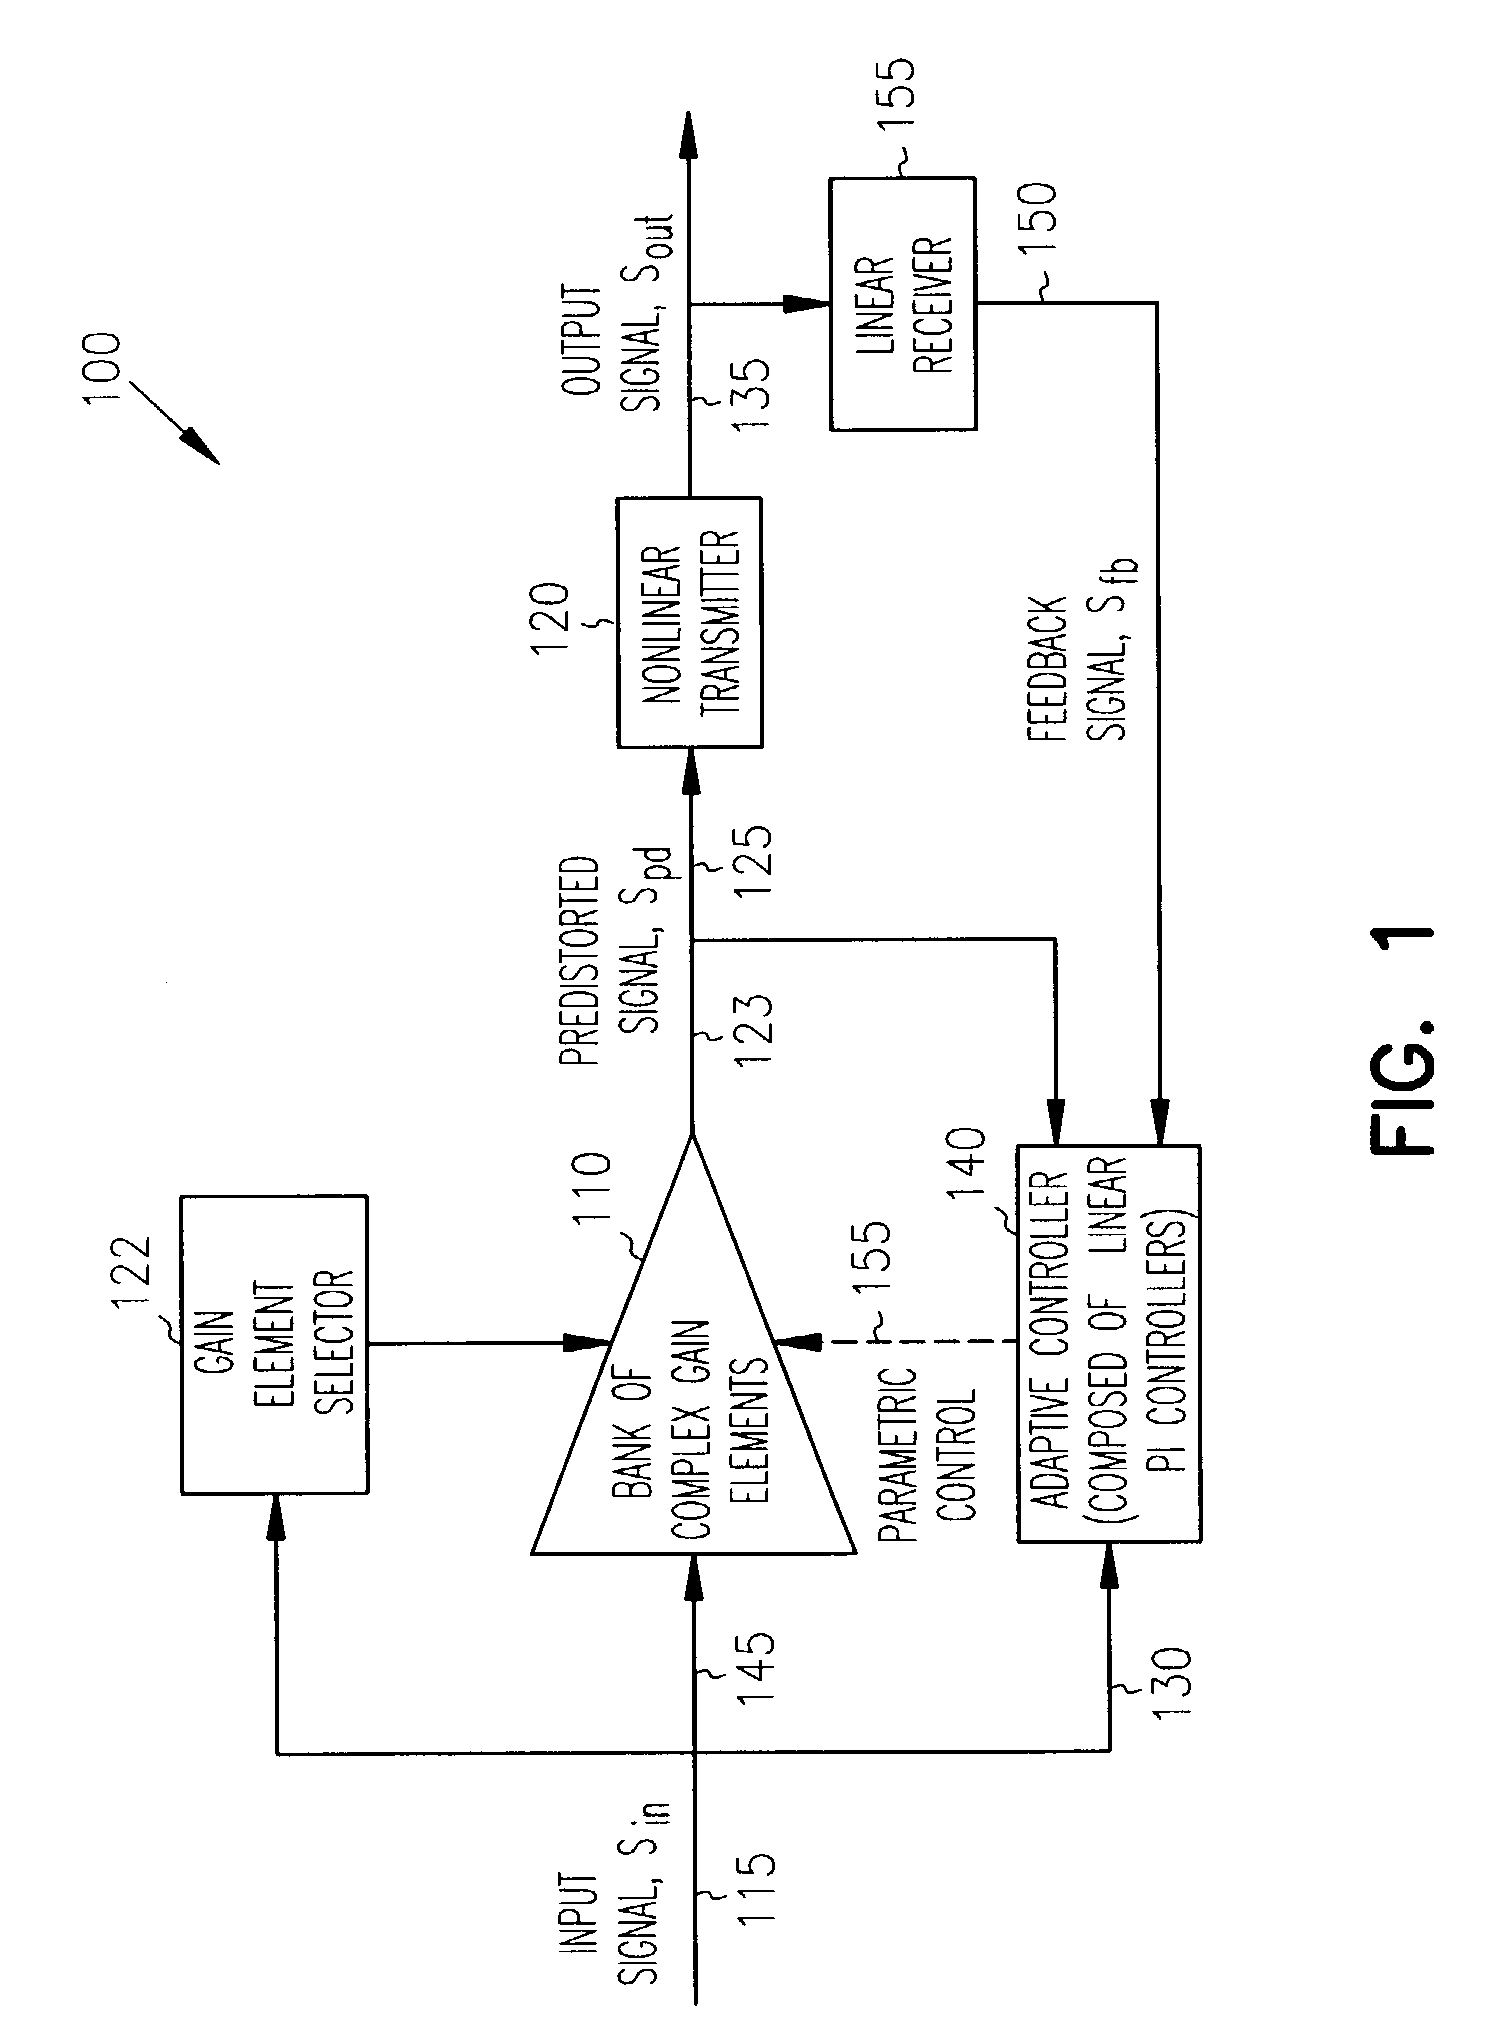 Adaptive controller for linearization of transmitter